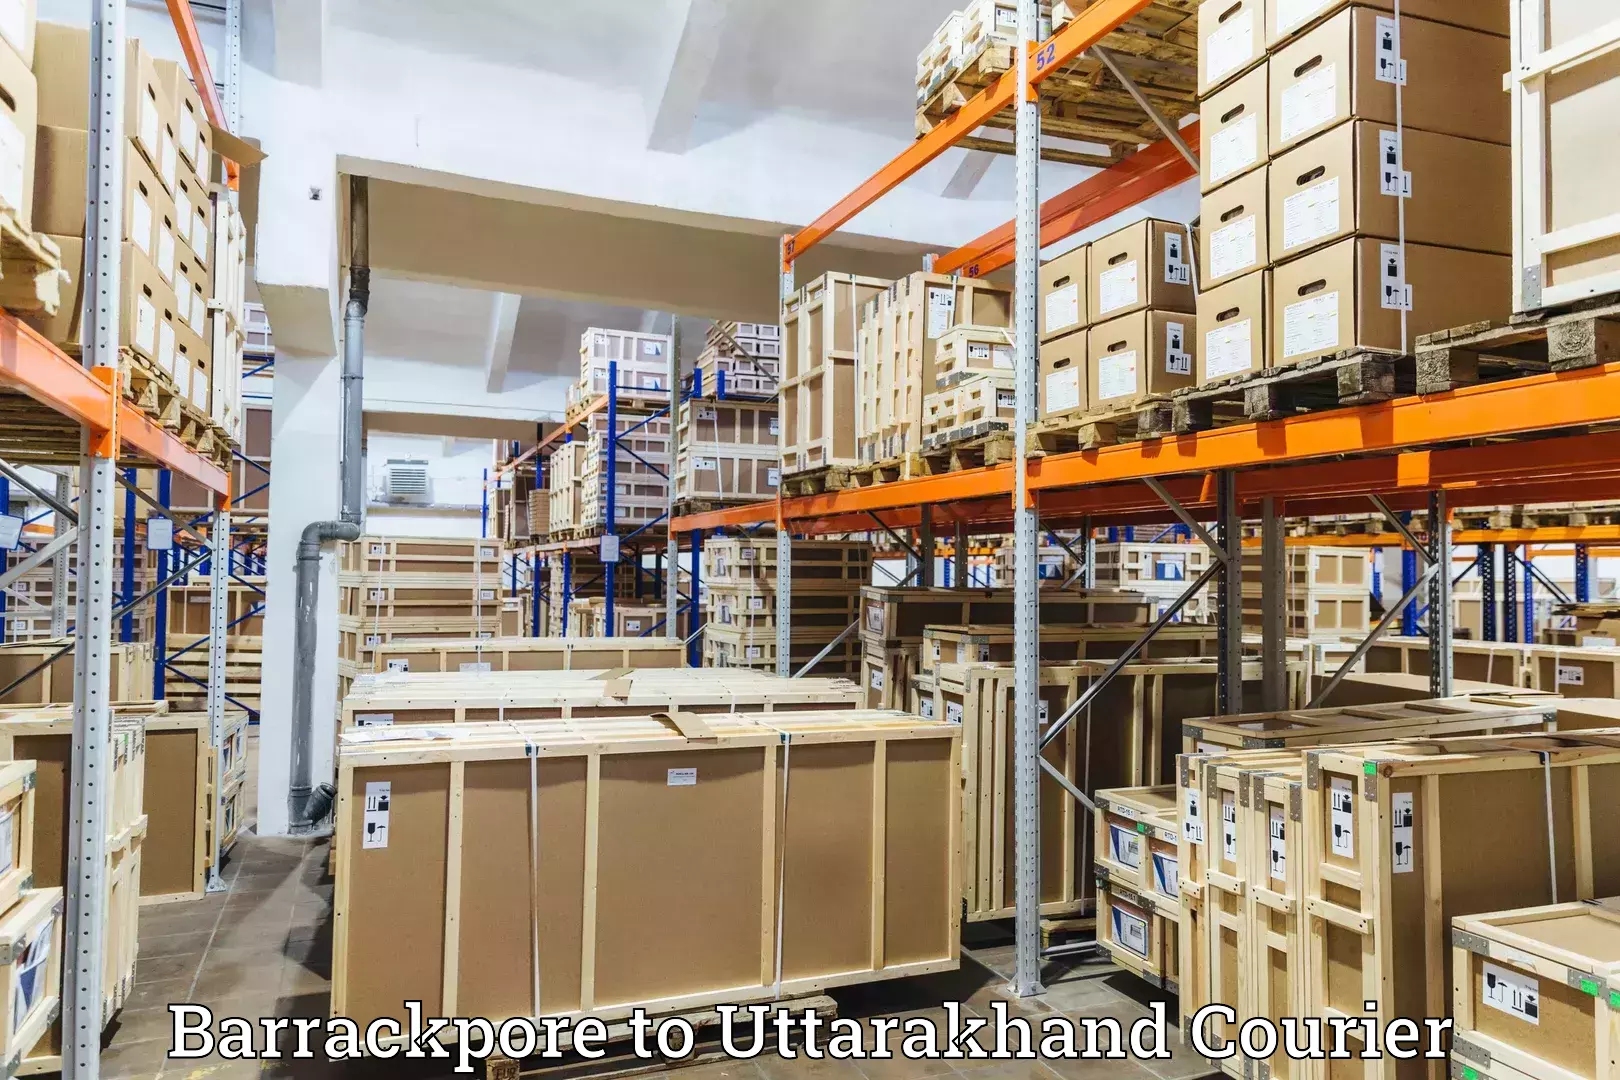 Efficient order fulfillment in Barrackpore to Roorkee